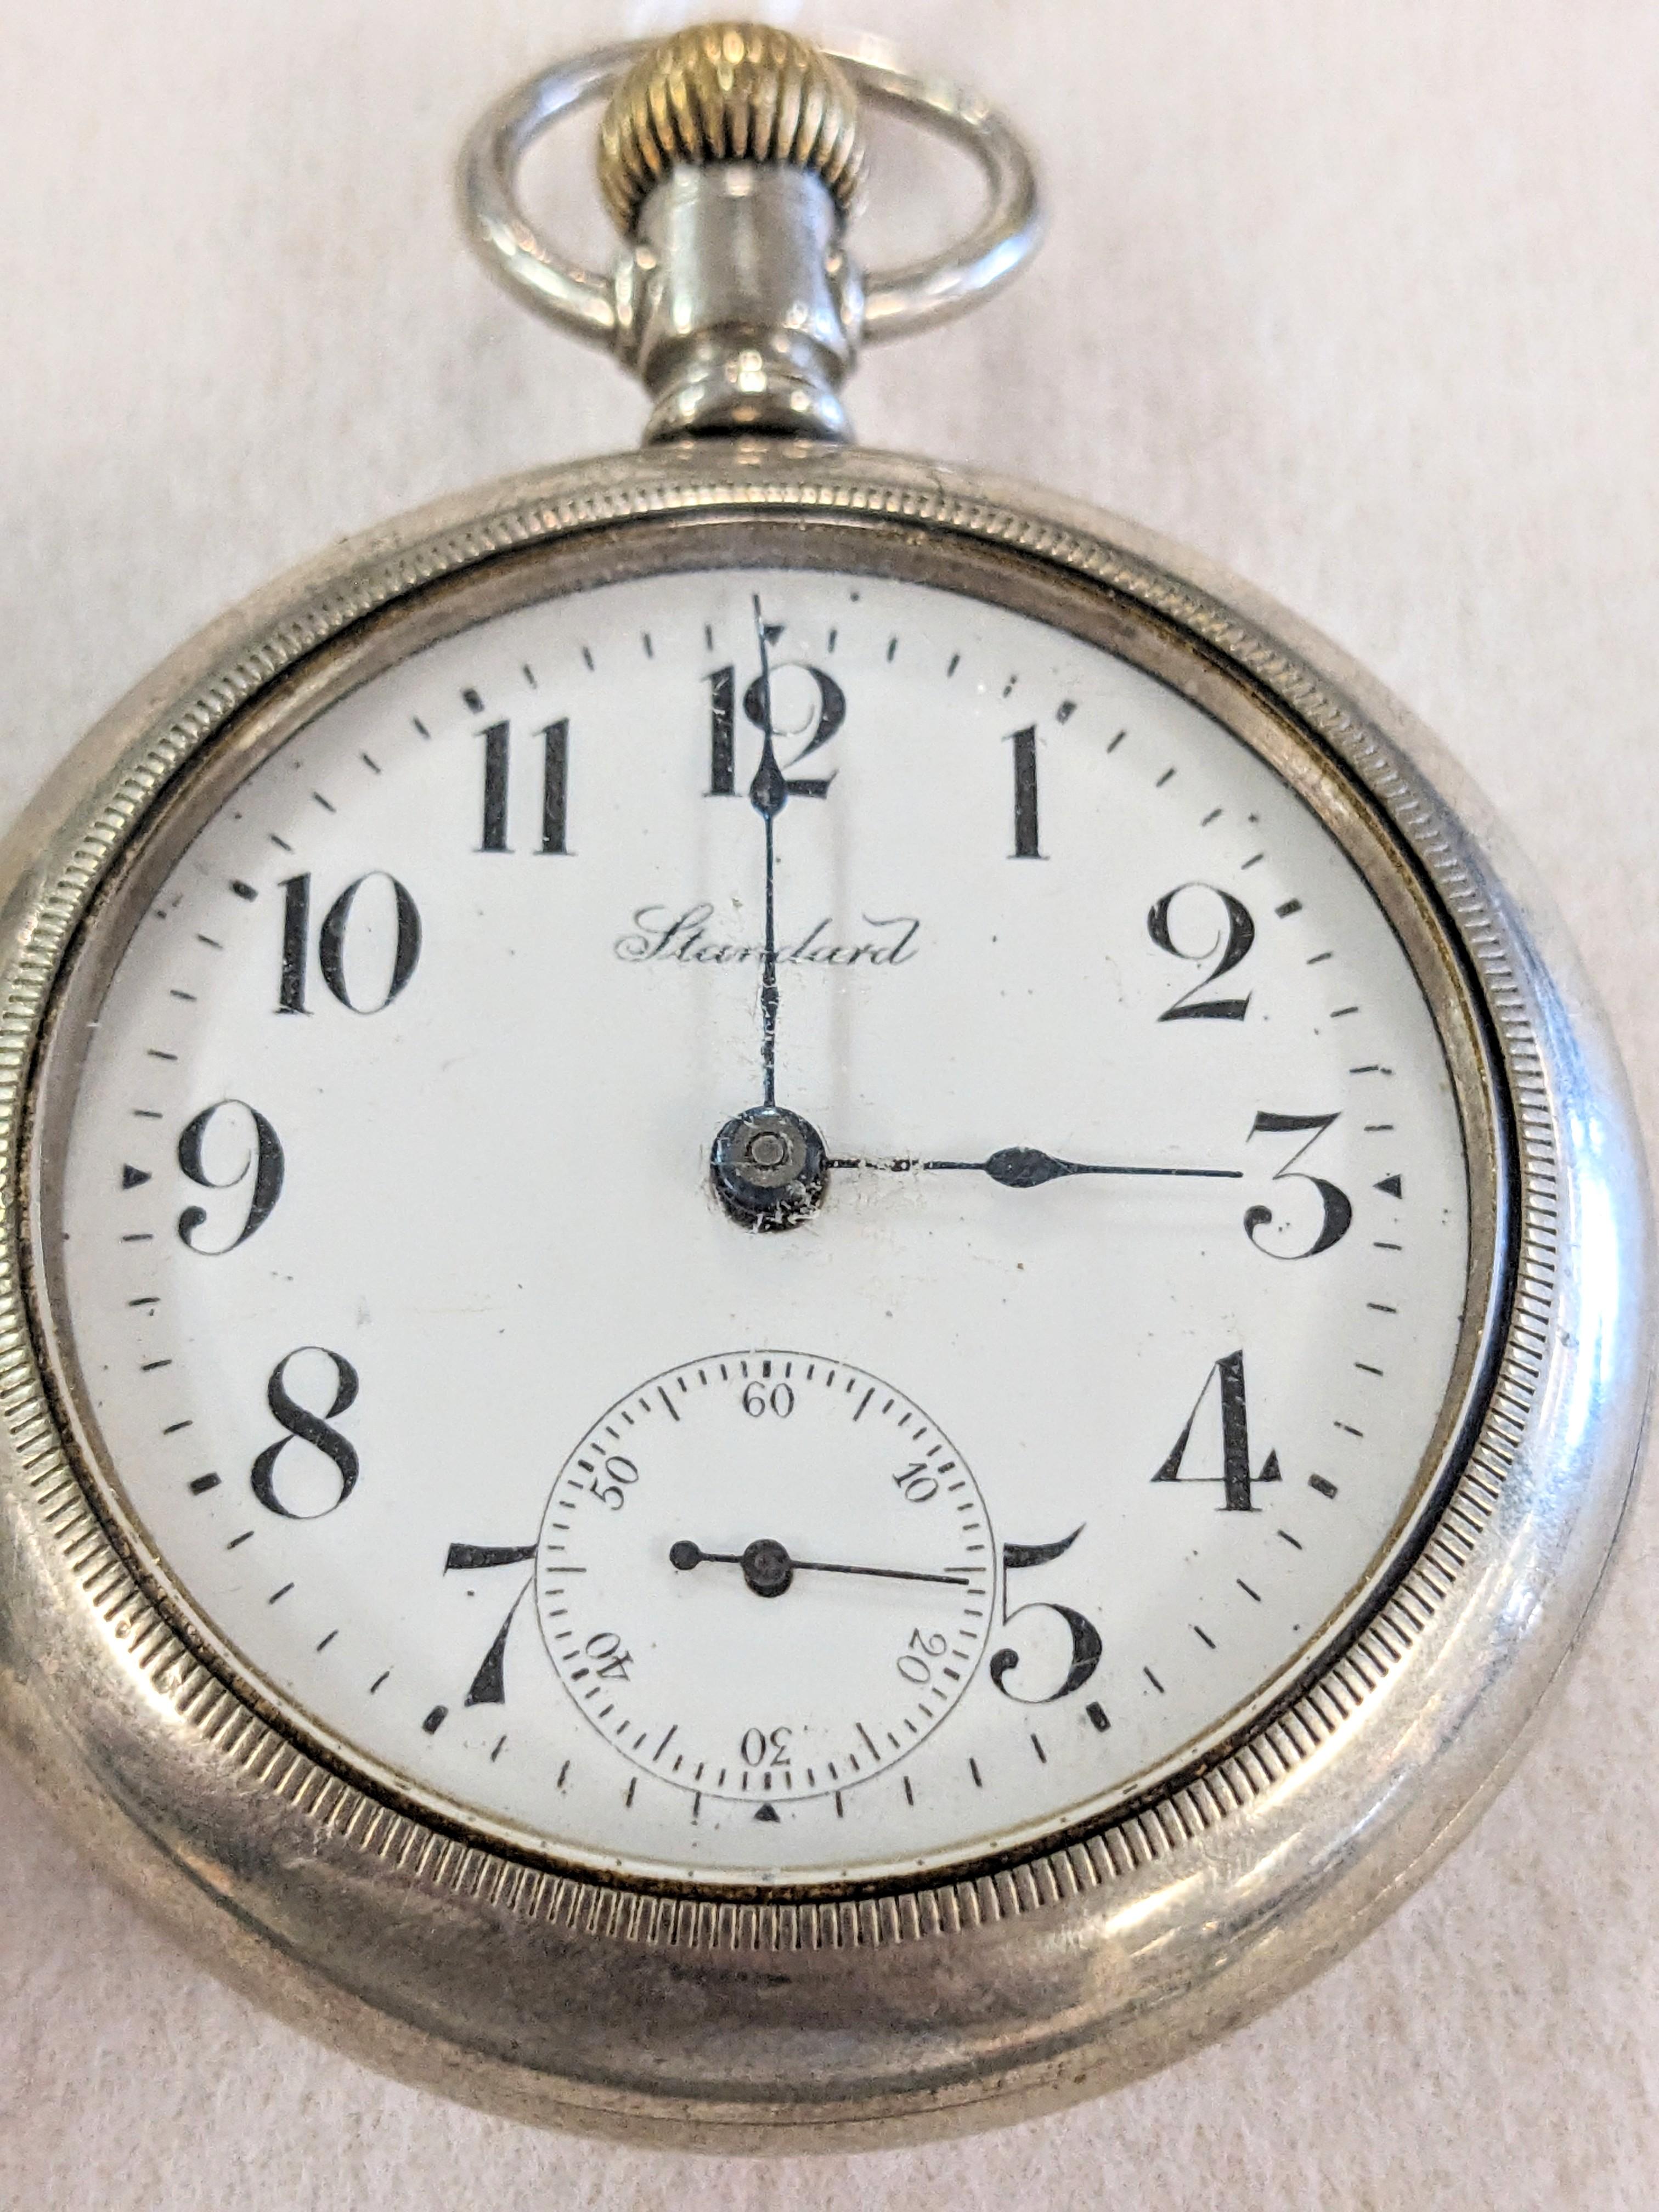 NY. STANDARD & AW WALTHAM "PS BARTLET" POCKETWATCHES NON-WORKING